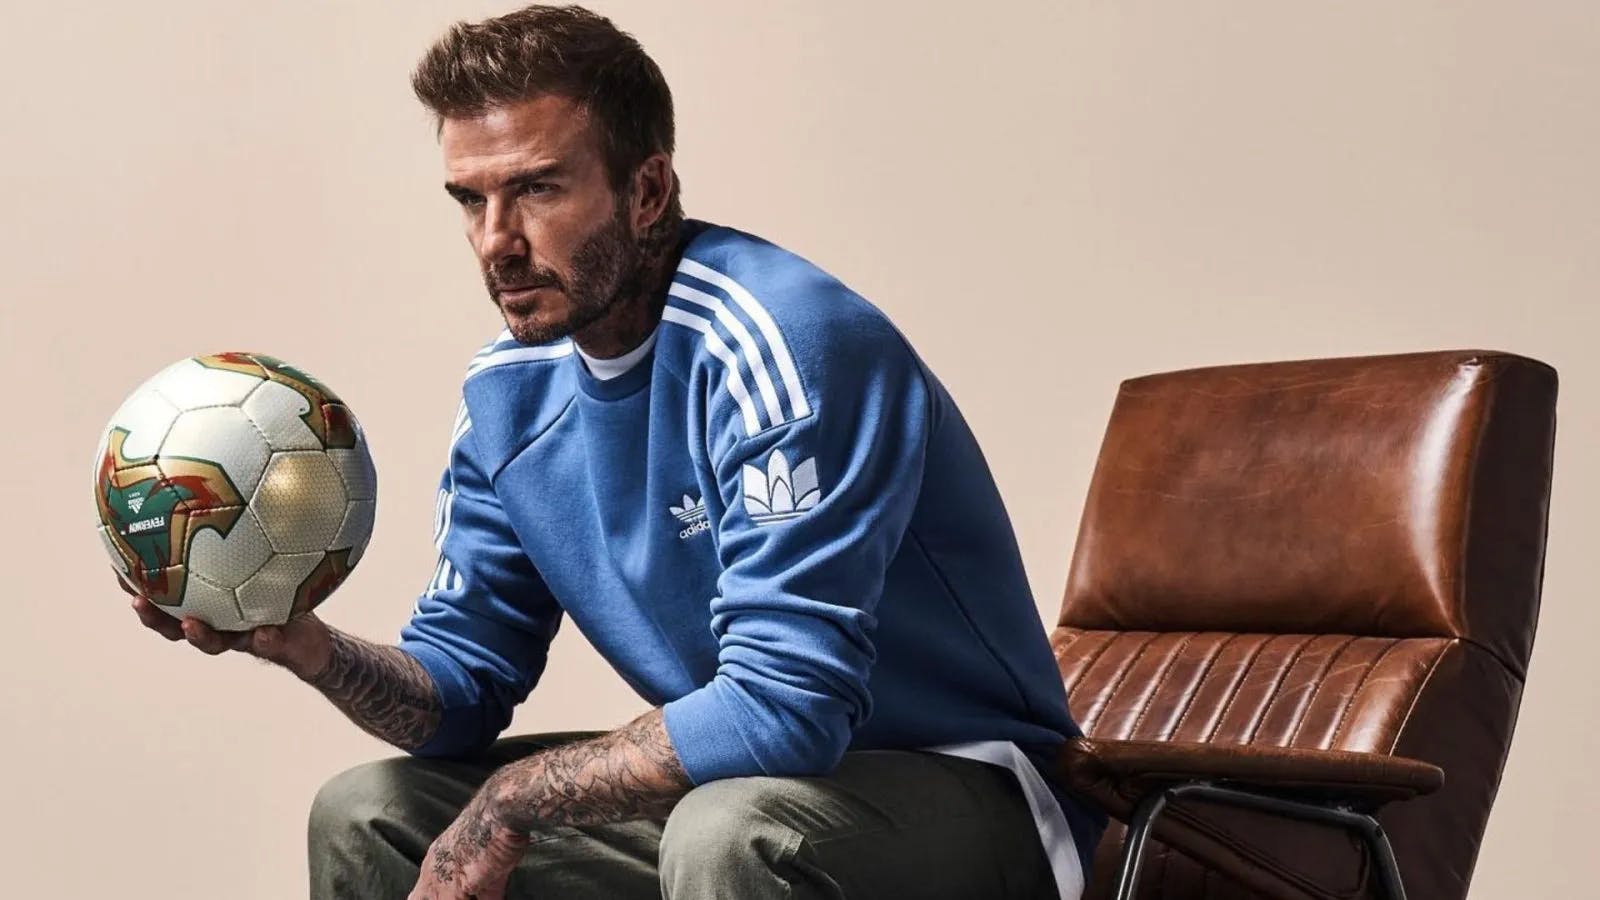 David Beckham sitting in a leather chair holding a football.